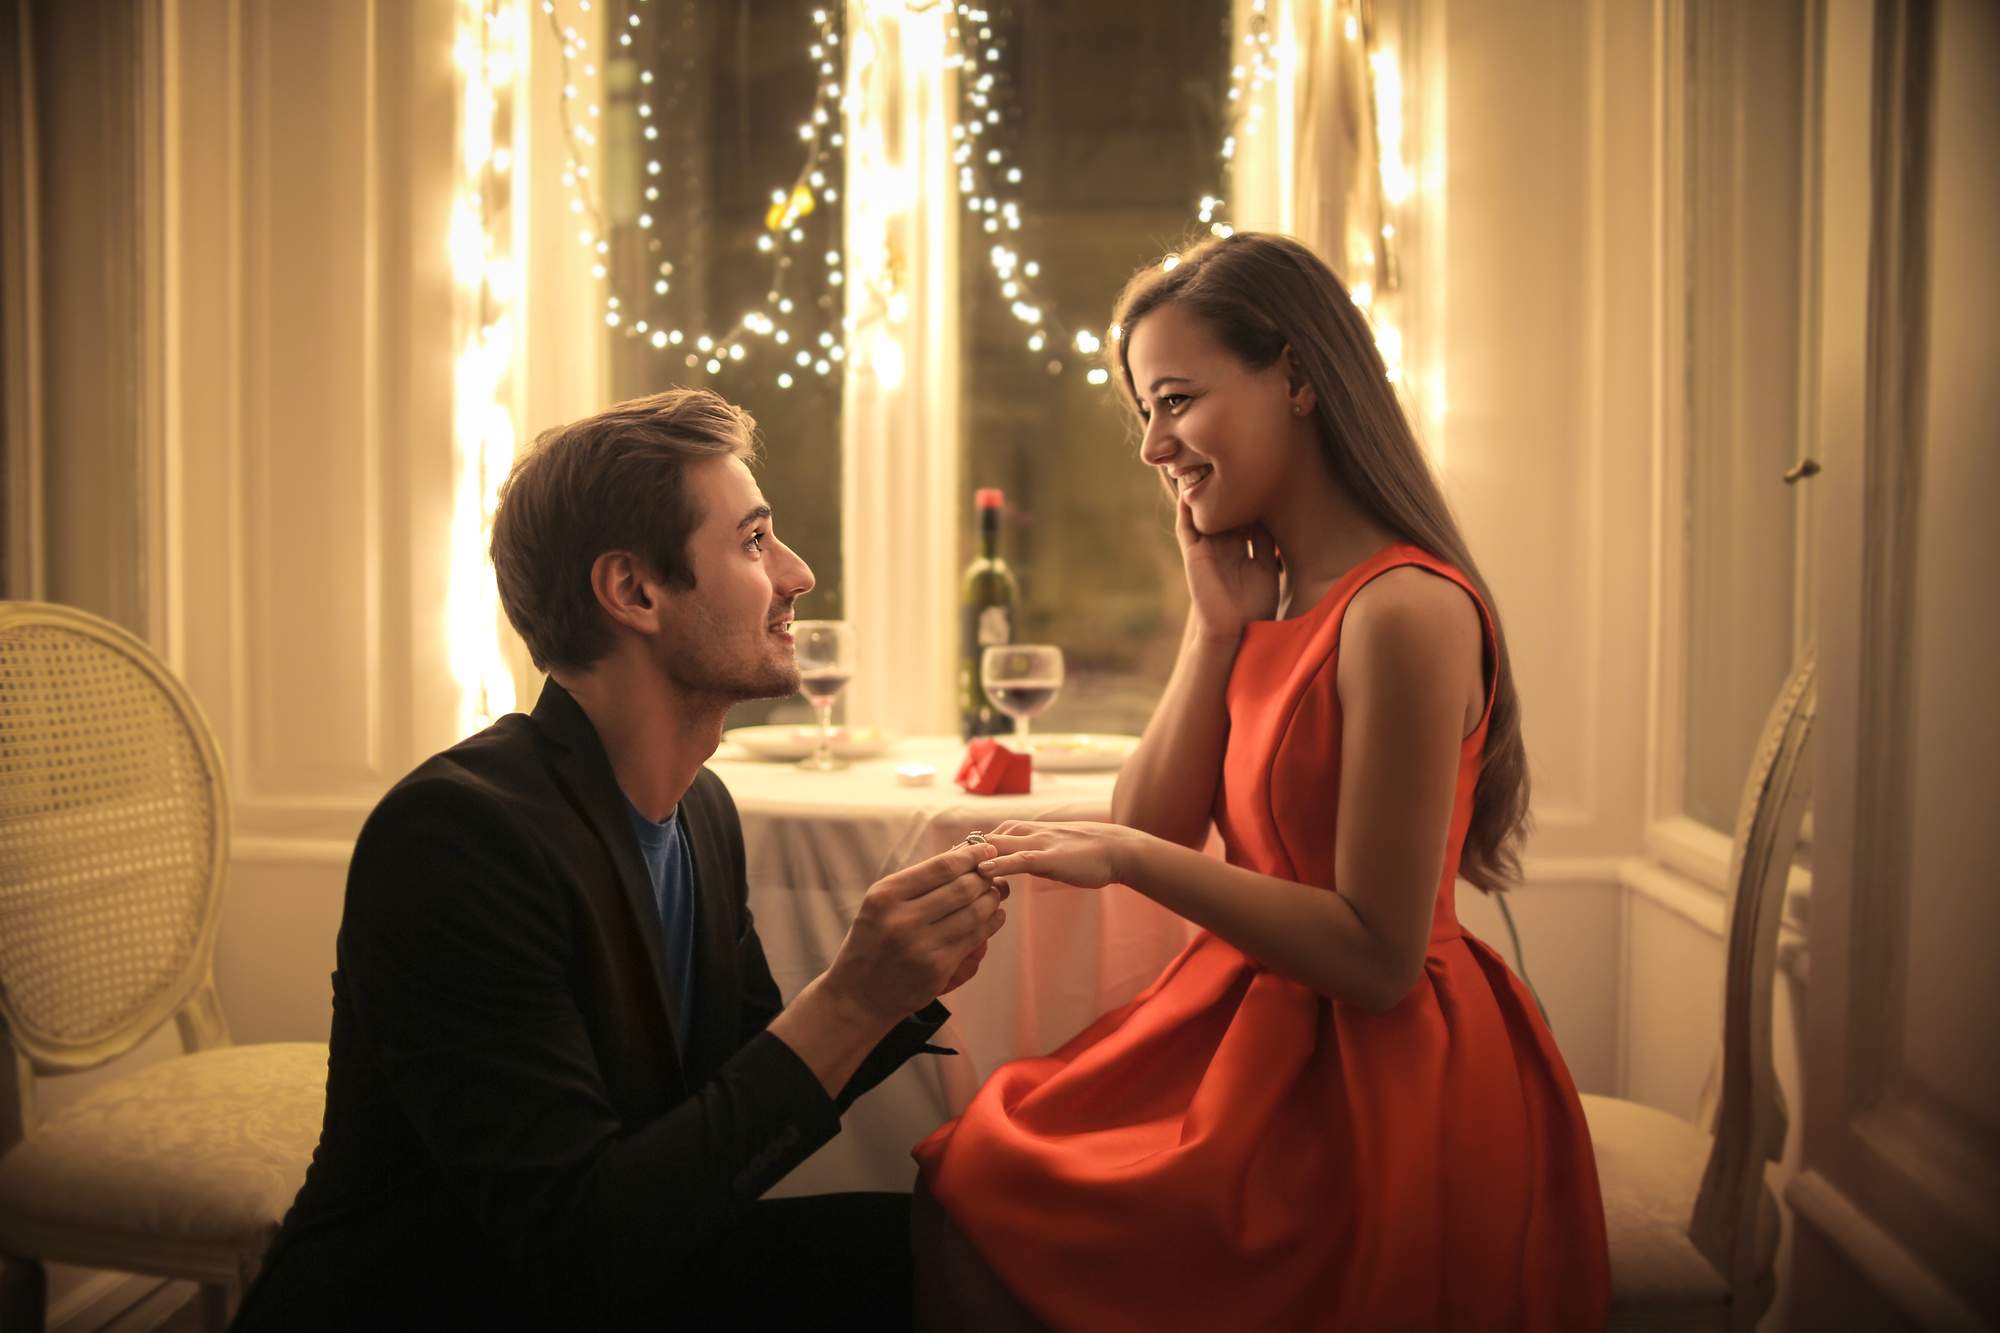 How to Propose: The Top Mistakes People Make